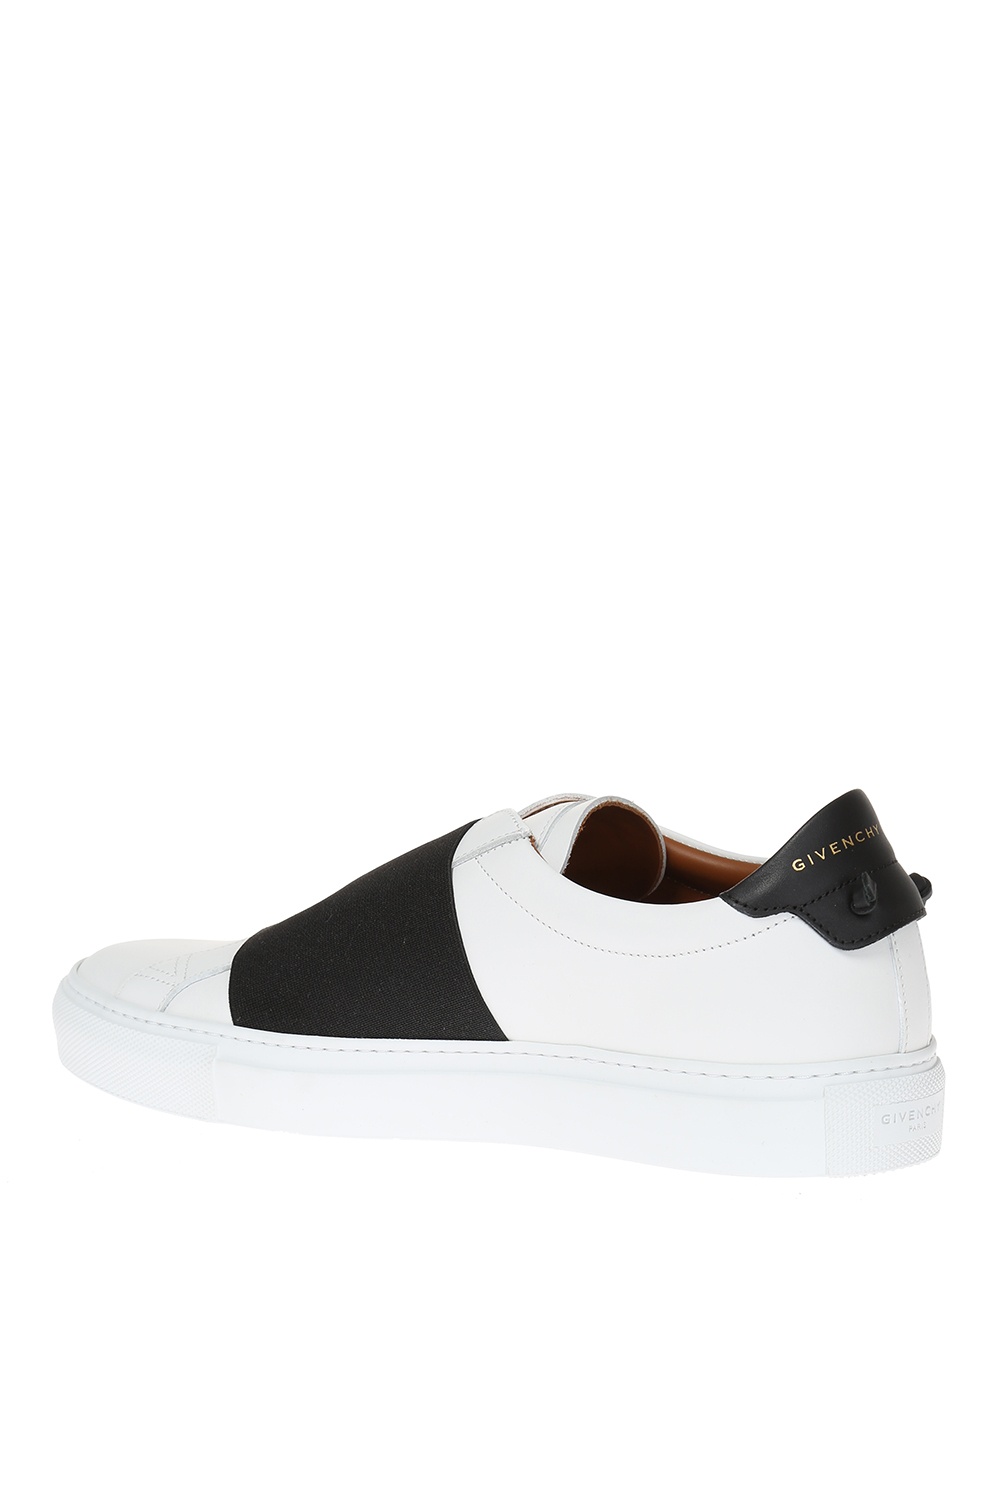 givenchy sneakers elastic